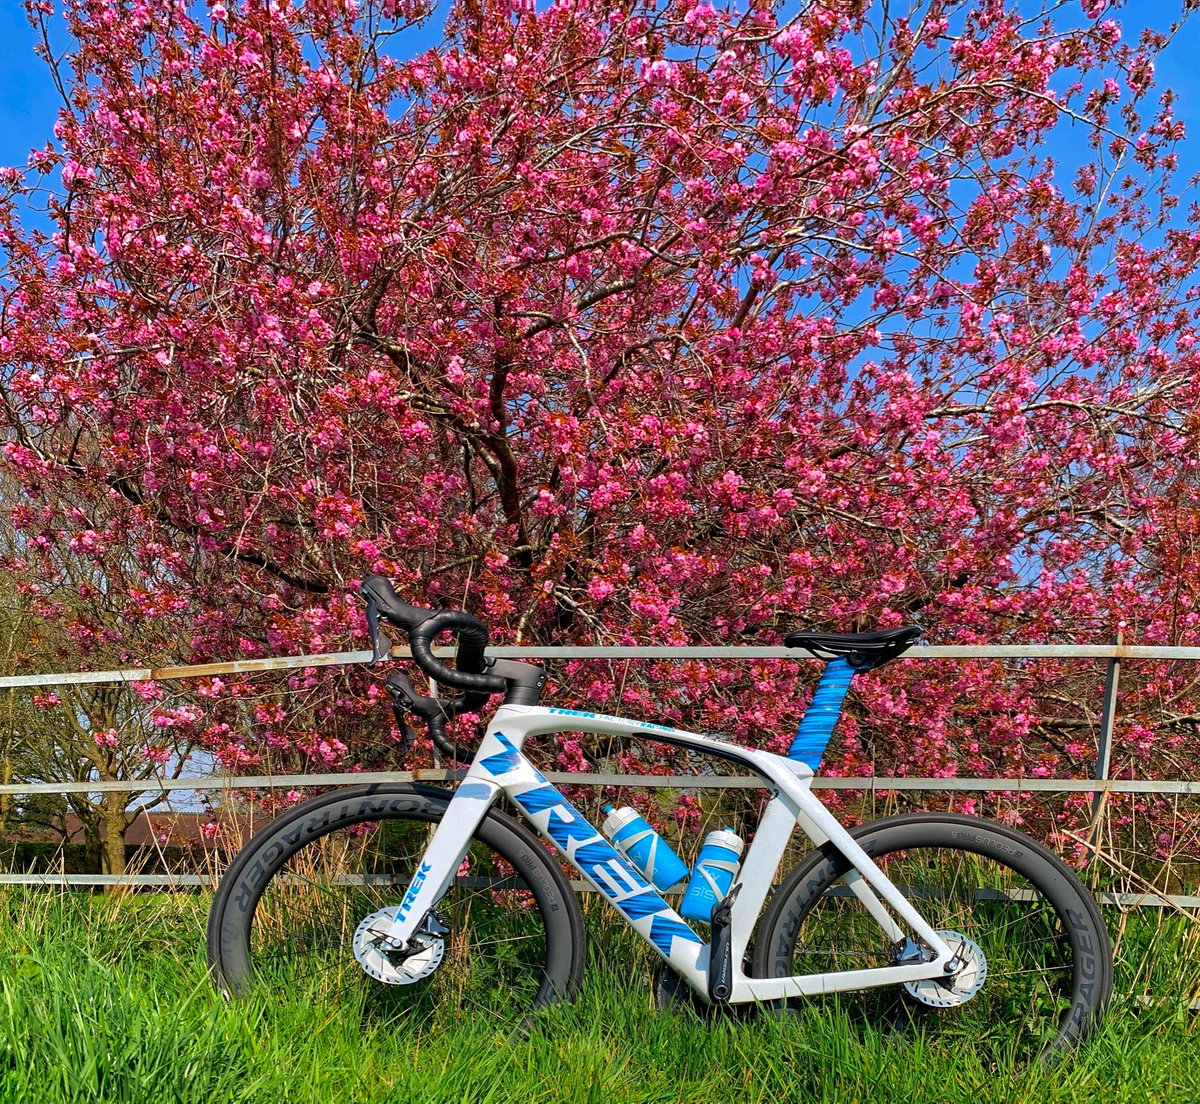 Pink alert 🚨 #cotswolds #timeheals #cotswoldcycling #socialdistancing #ridesolo #springsunshine #keeppedalling #ironmantraining #pink #blossom #cyclistsfightingcancer #trekbikesuk #cotswoldcycles #charity #cyclinglife #madone #projectone #20in20